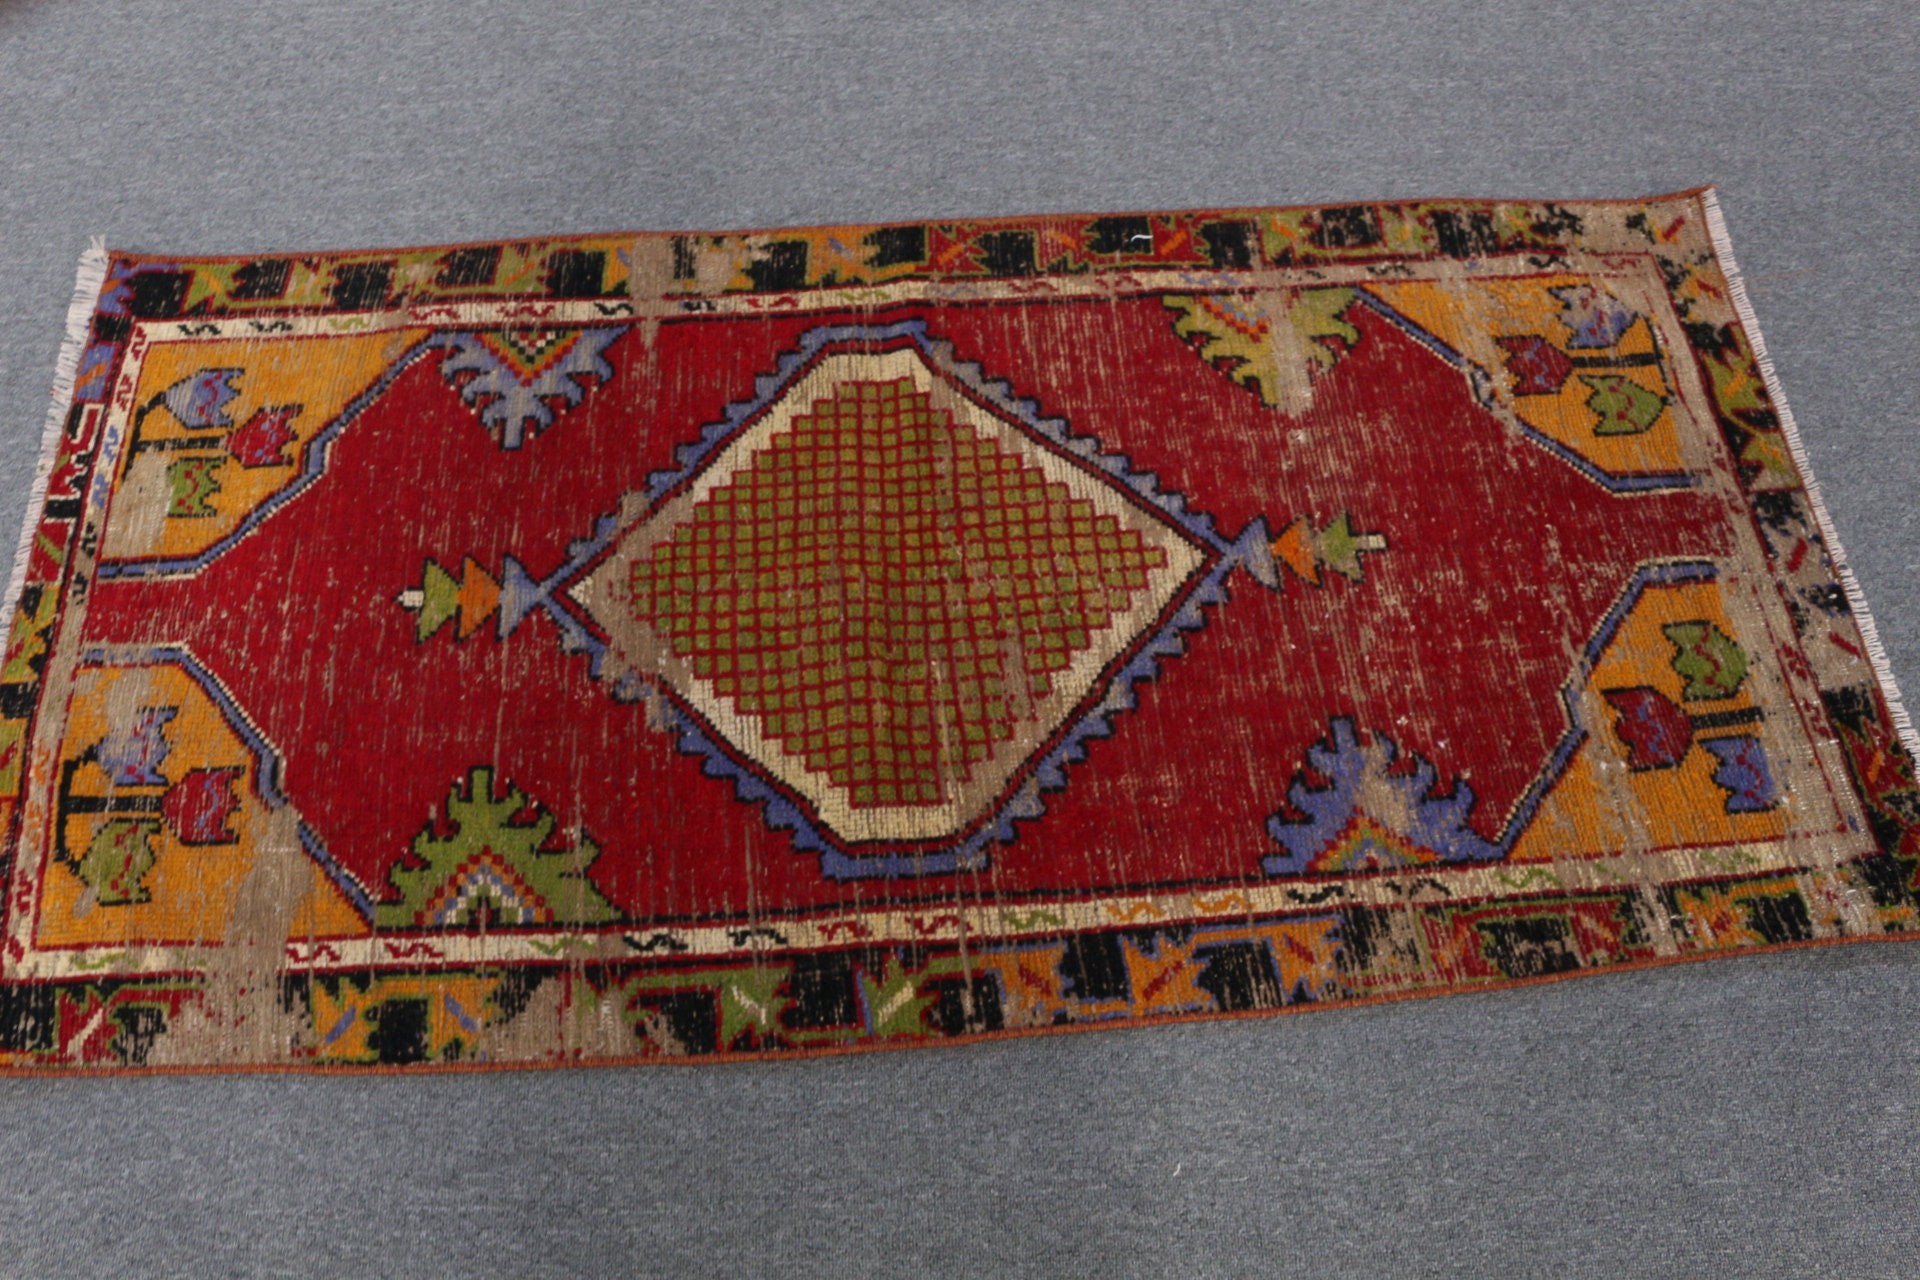 2.5x5.2 ft Small Rug, Car Mat Rug, Rugs for Kitchen, Wool Rug, Red Antique Rugs, Bath Rug, Vintage Rug, Turkish Rug, Home Decor Rugs